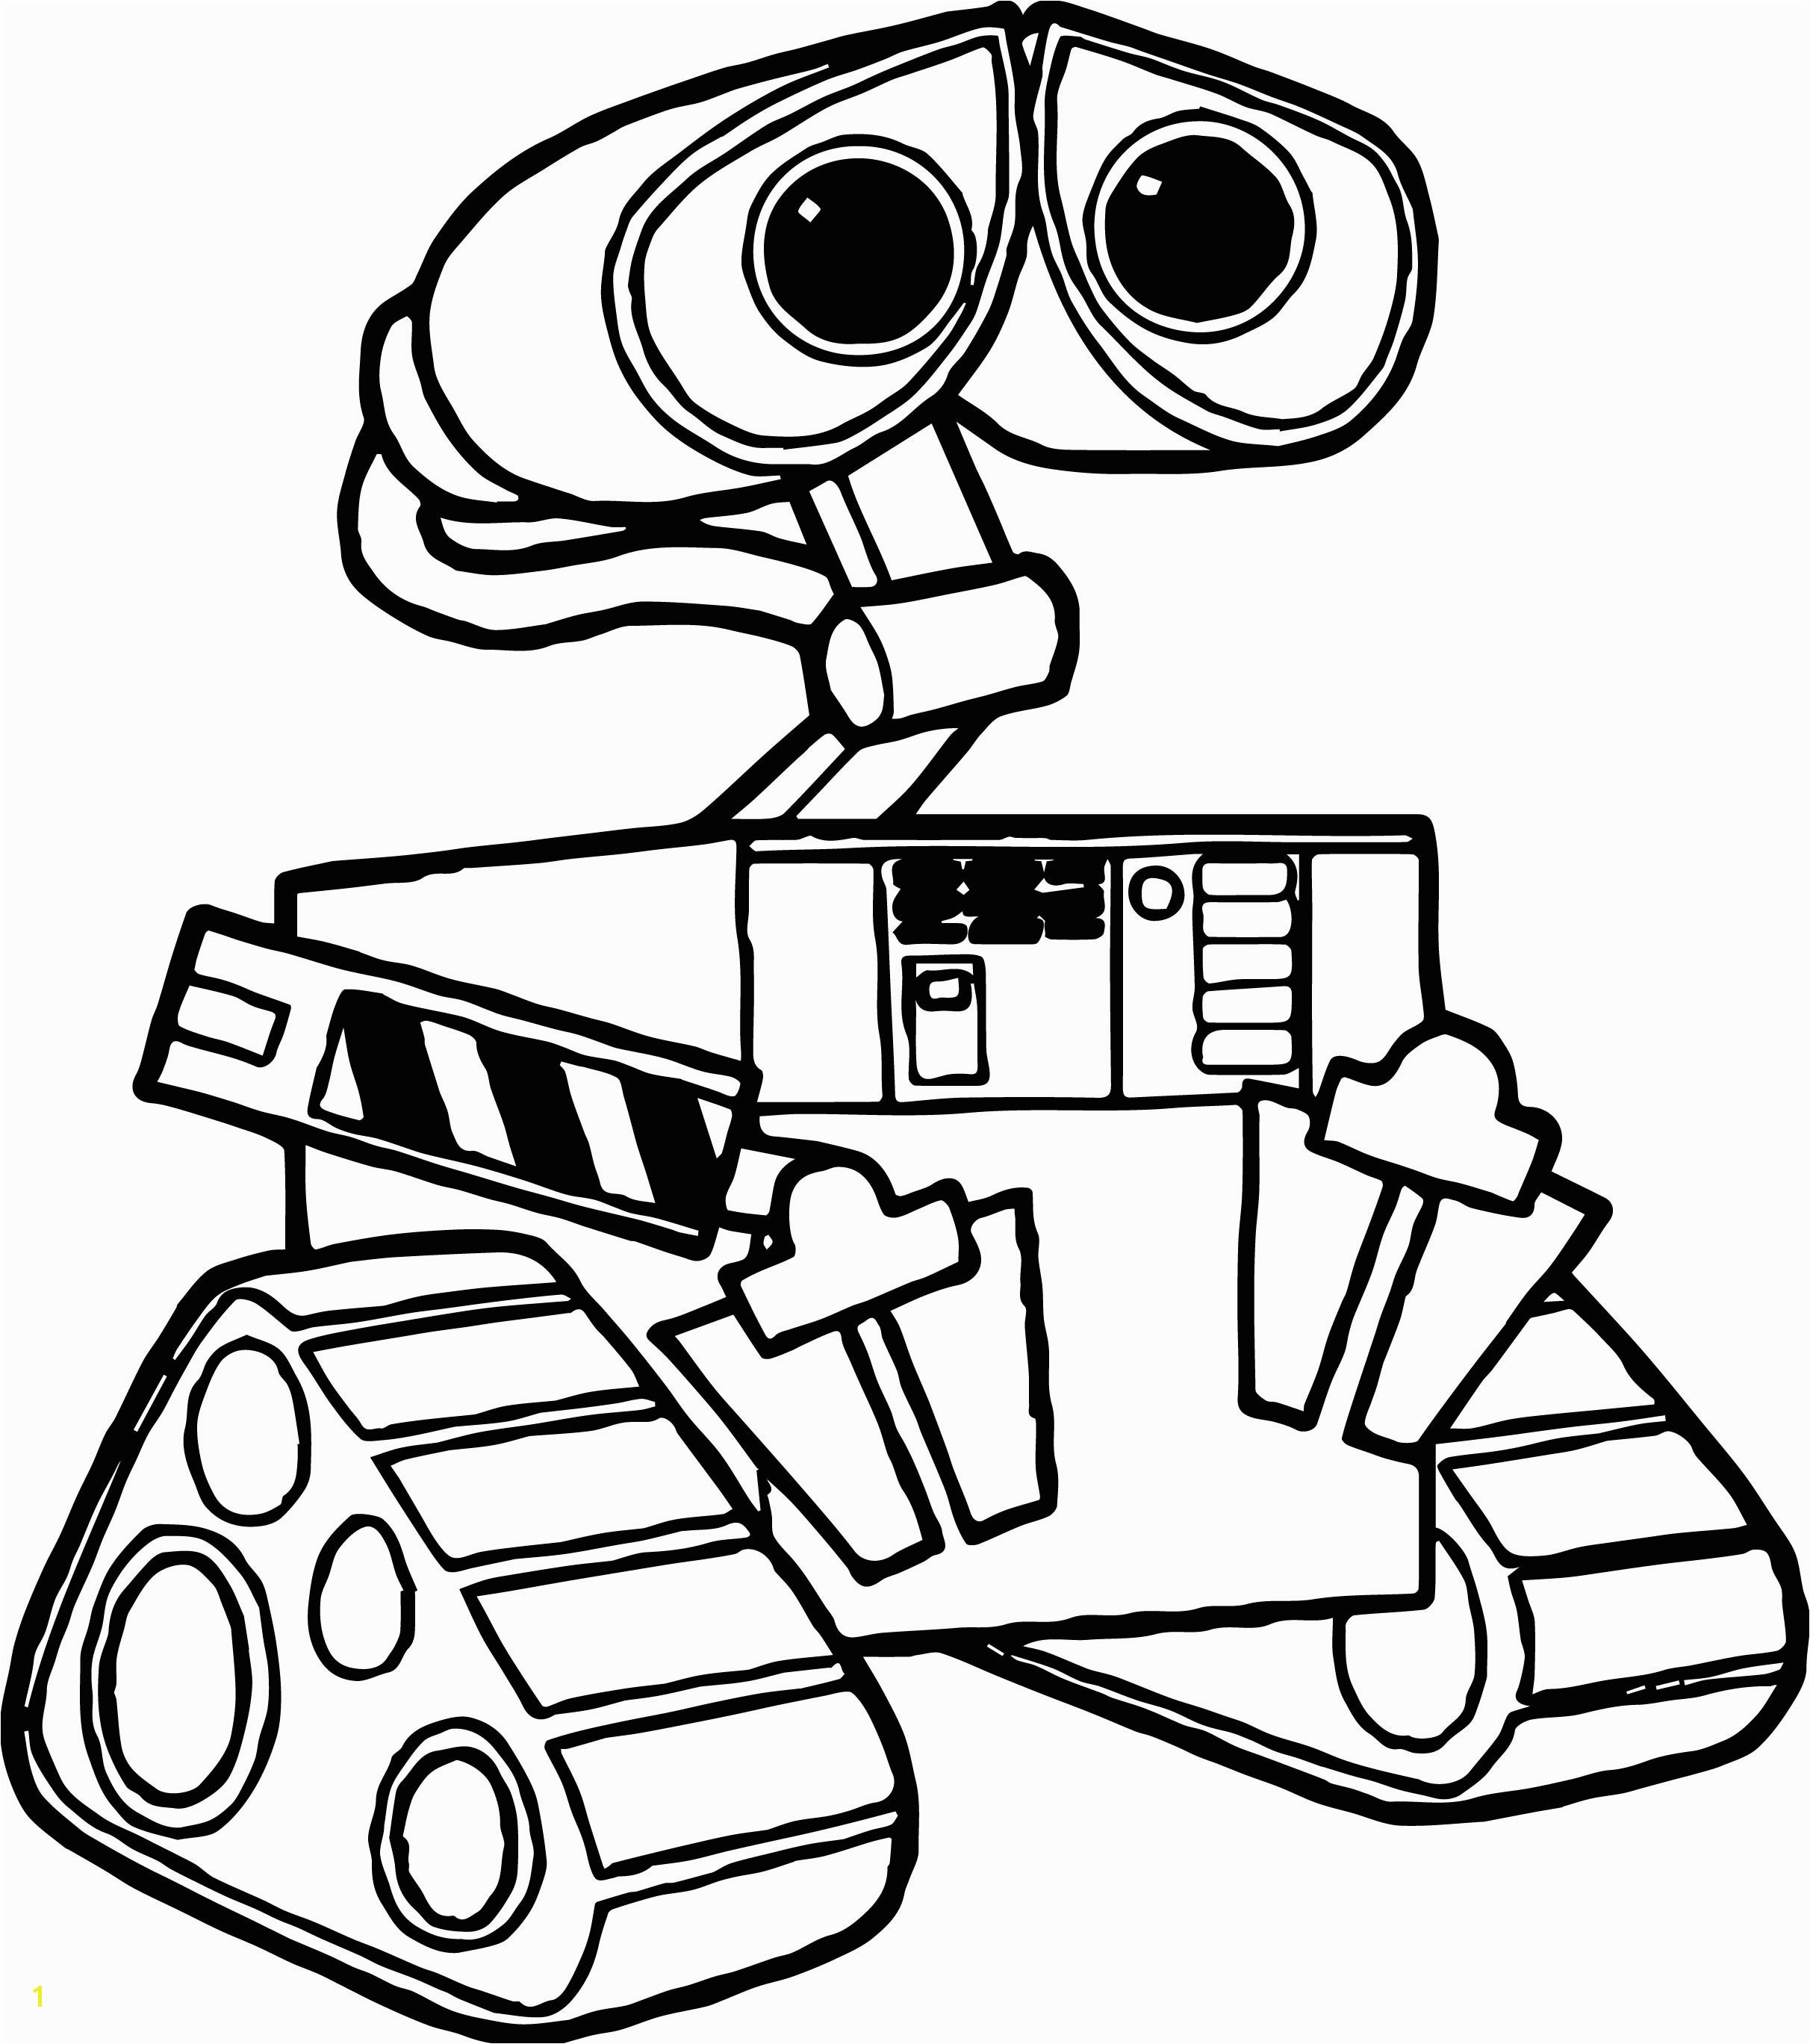 Wall E and Eve Coloring Pages Wall E Coloring Pages 20 T Wall E Home Coloring Pages for Kids New